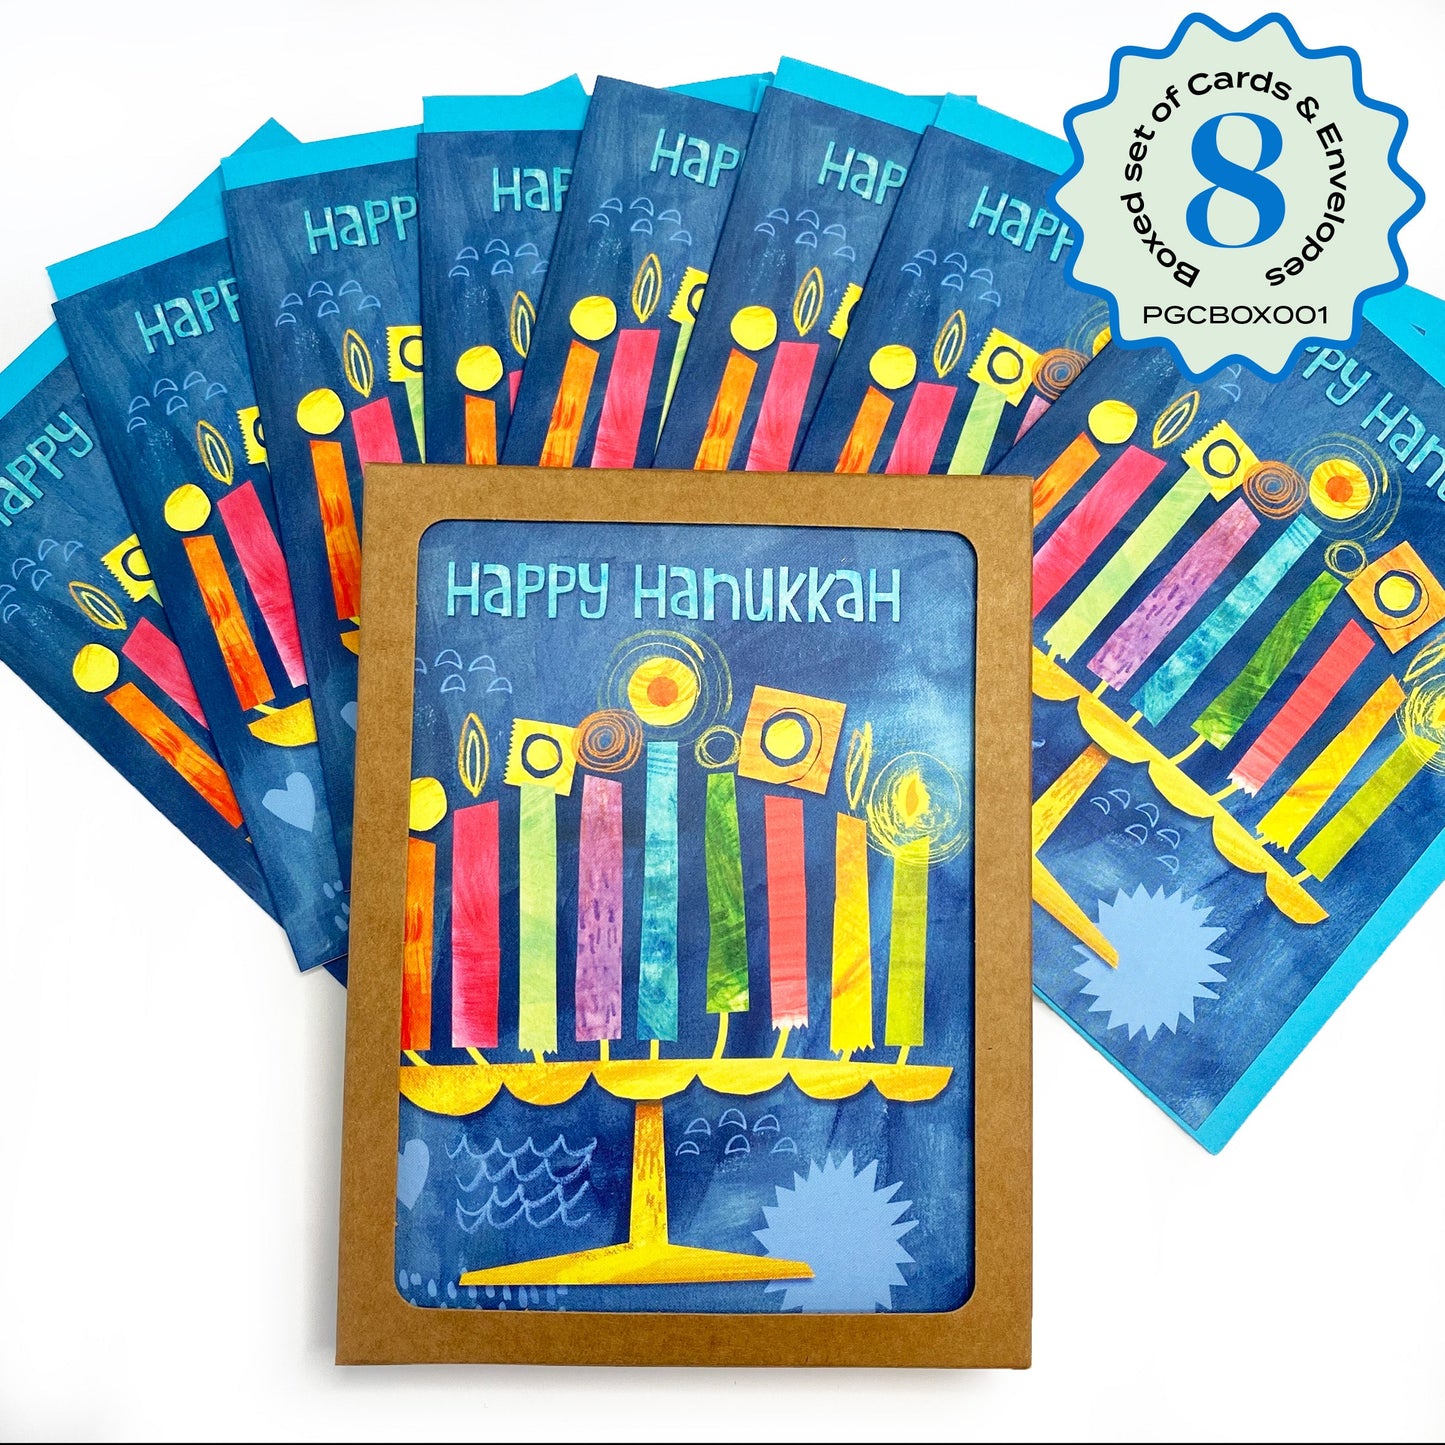 Boxed Set of 8 Cards-Happy Hanukkah Greeting Cards-Wholesale